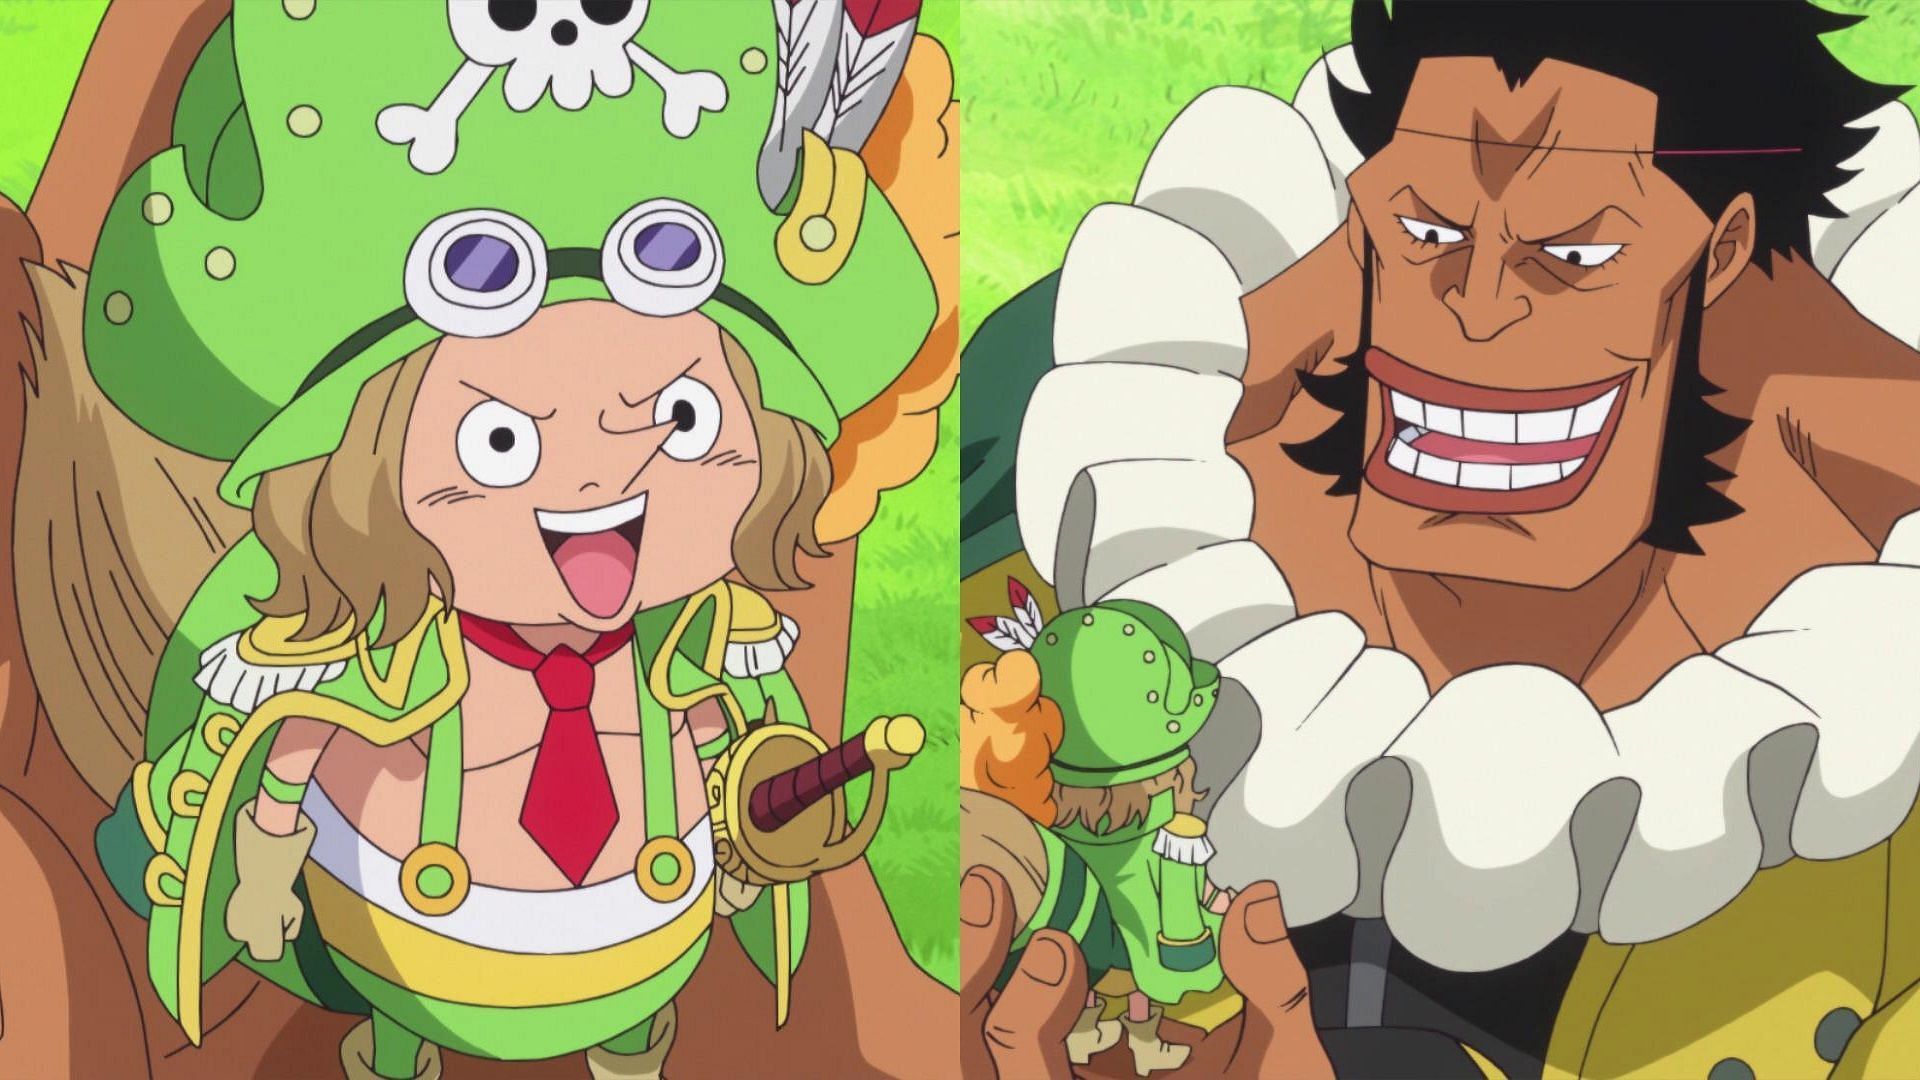 Leo and Sai as seen in One Piece (Image via Toei Animation, One Piece)